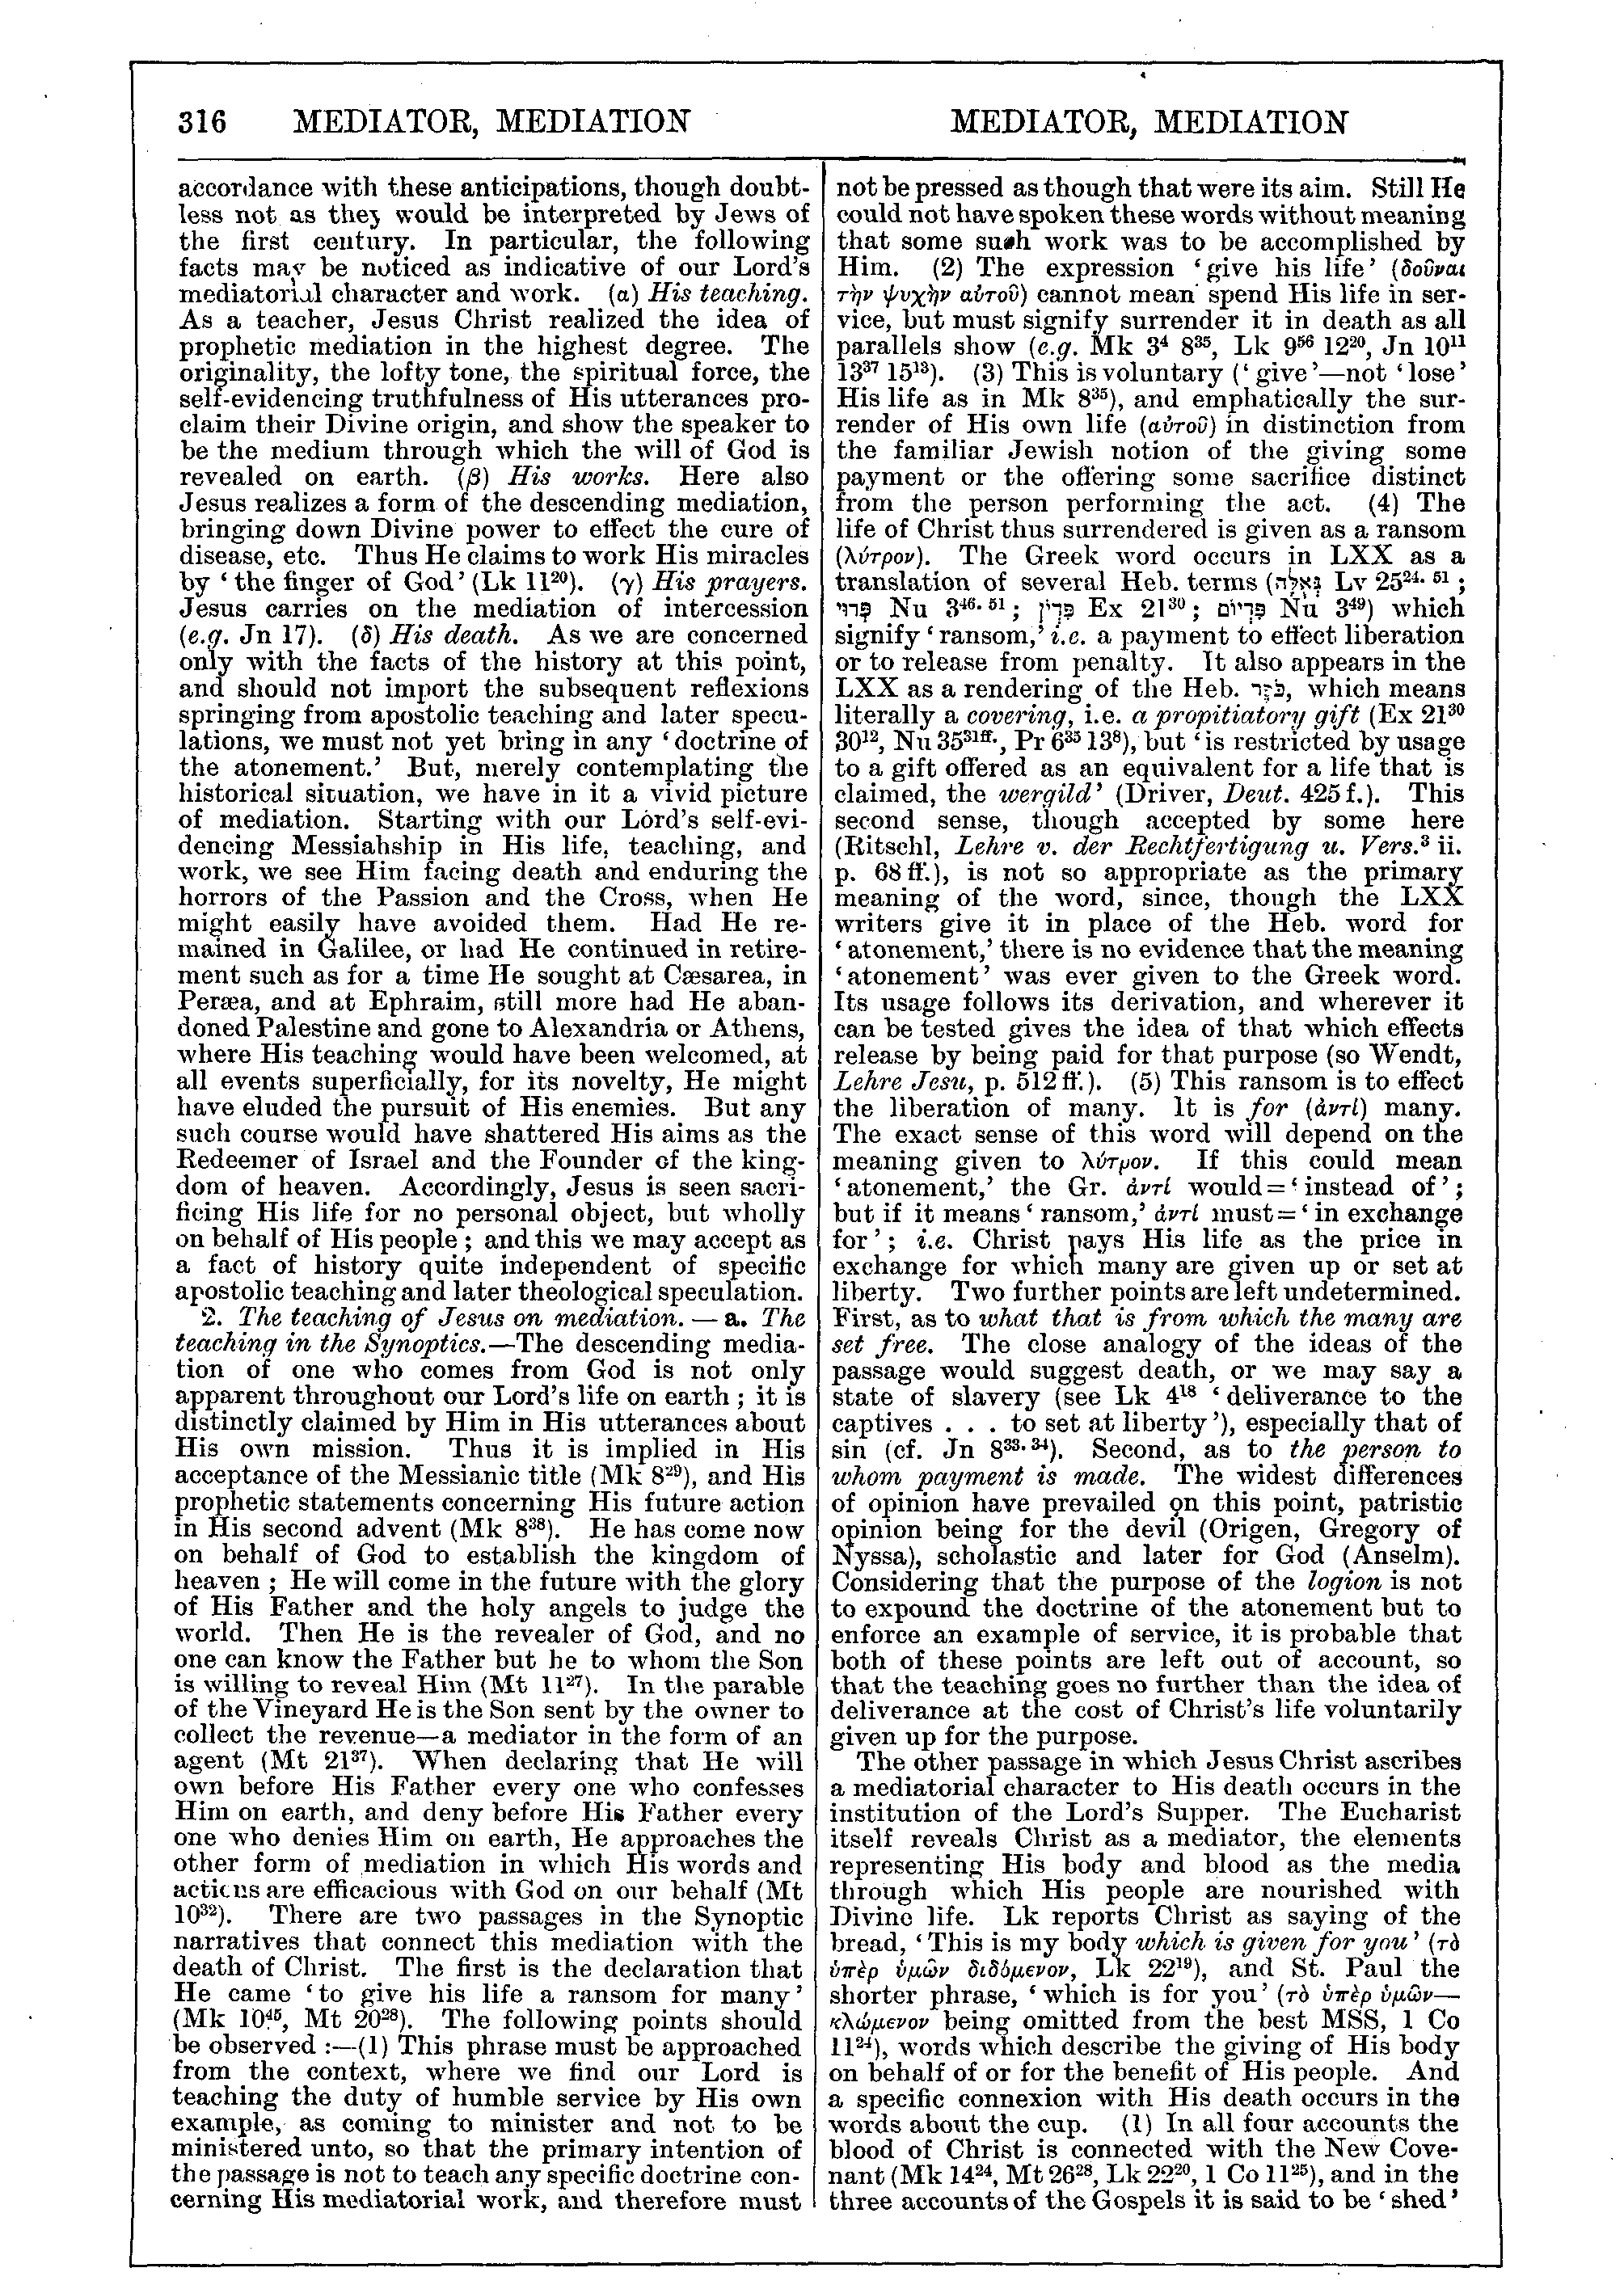 Image of page 316